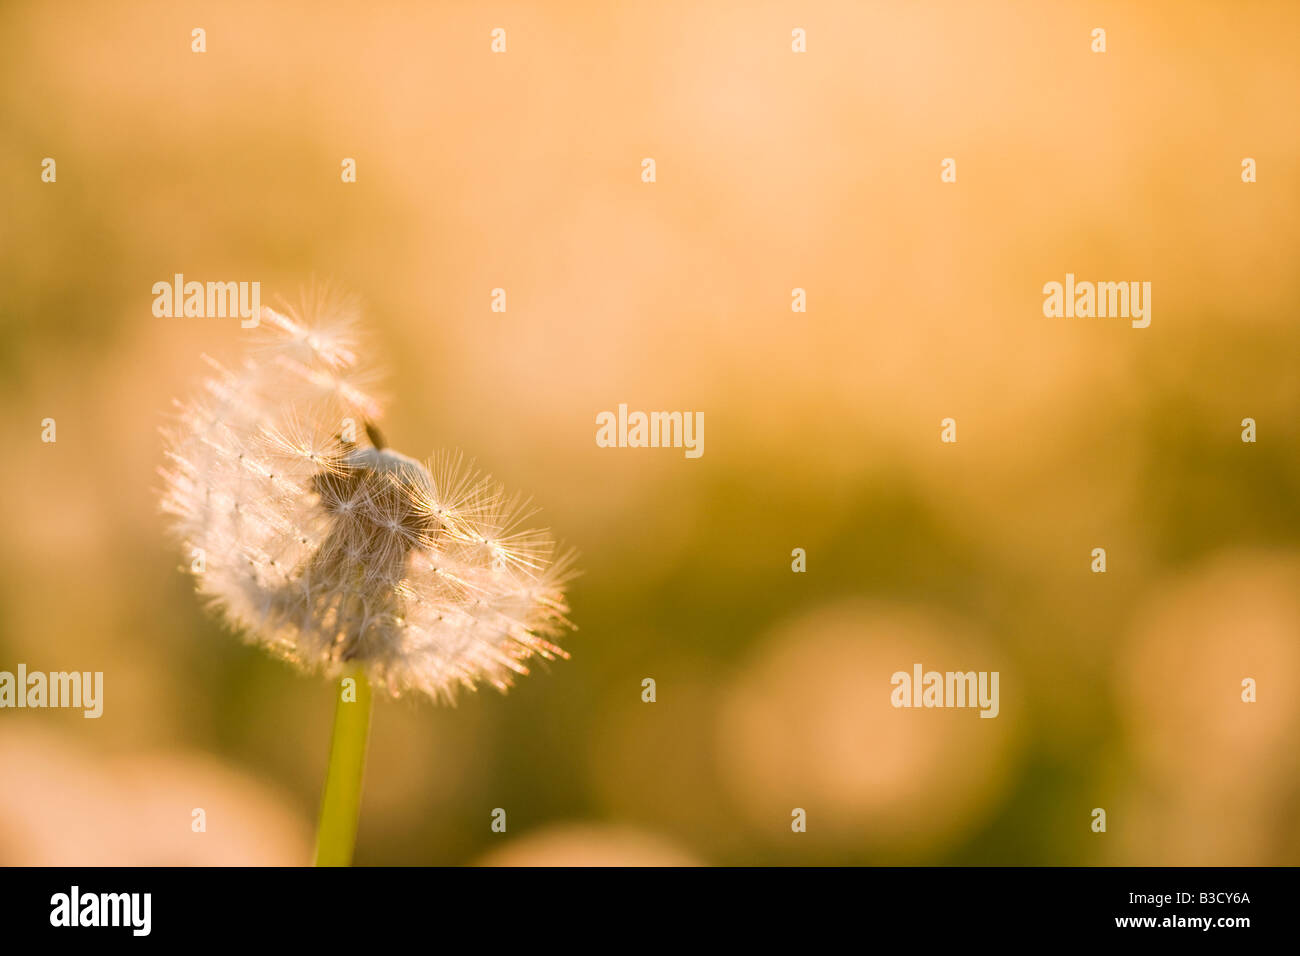 Germany, Bavaria, Detailed view of dandelion seed, close-up Stock Photo